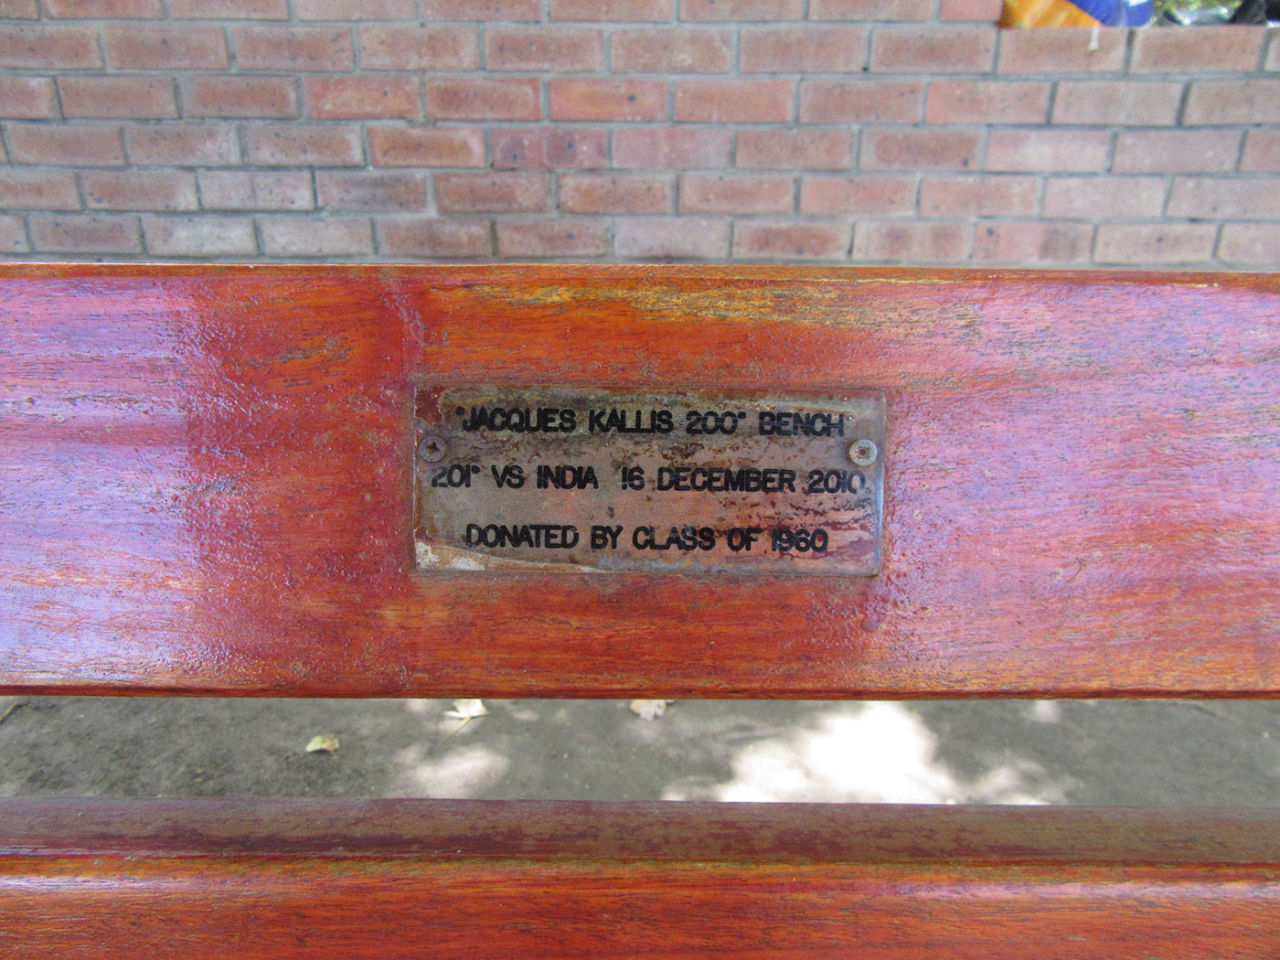 A bench that marks Jacques Kallis' Test double-hundred against India in 2010, Jacques Kallis Oval, Wynberg Boys High School, Cape Town, February 2018